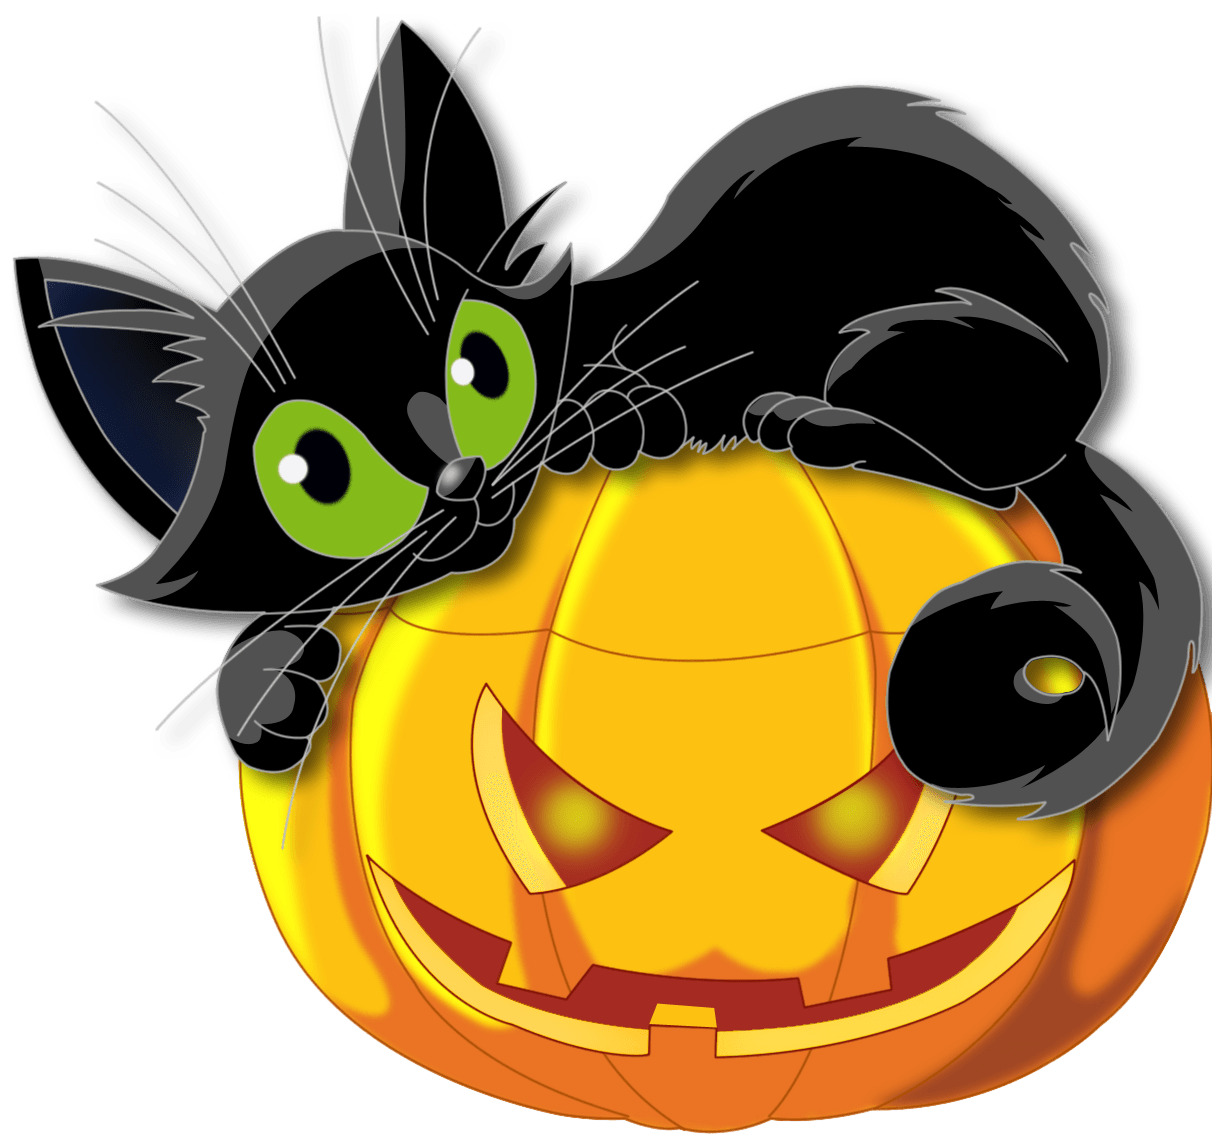 Pumpkin and Cat Halloween icons